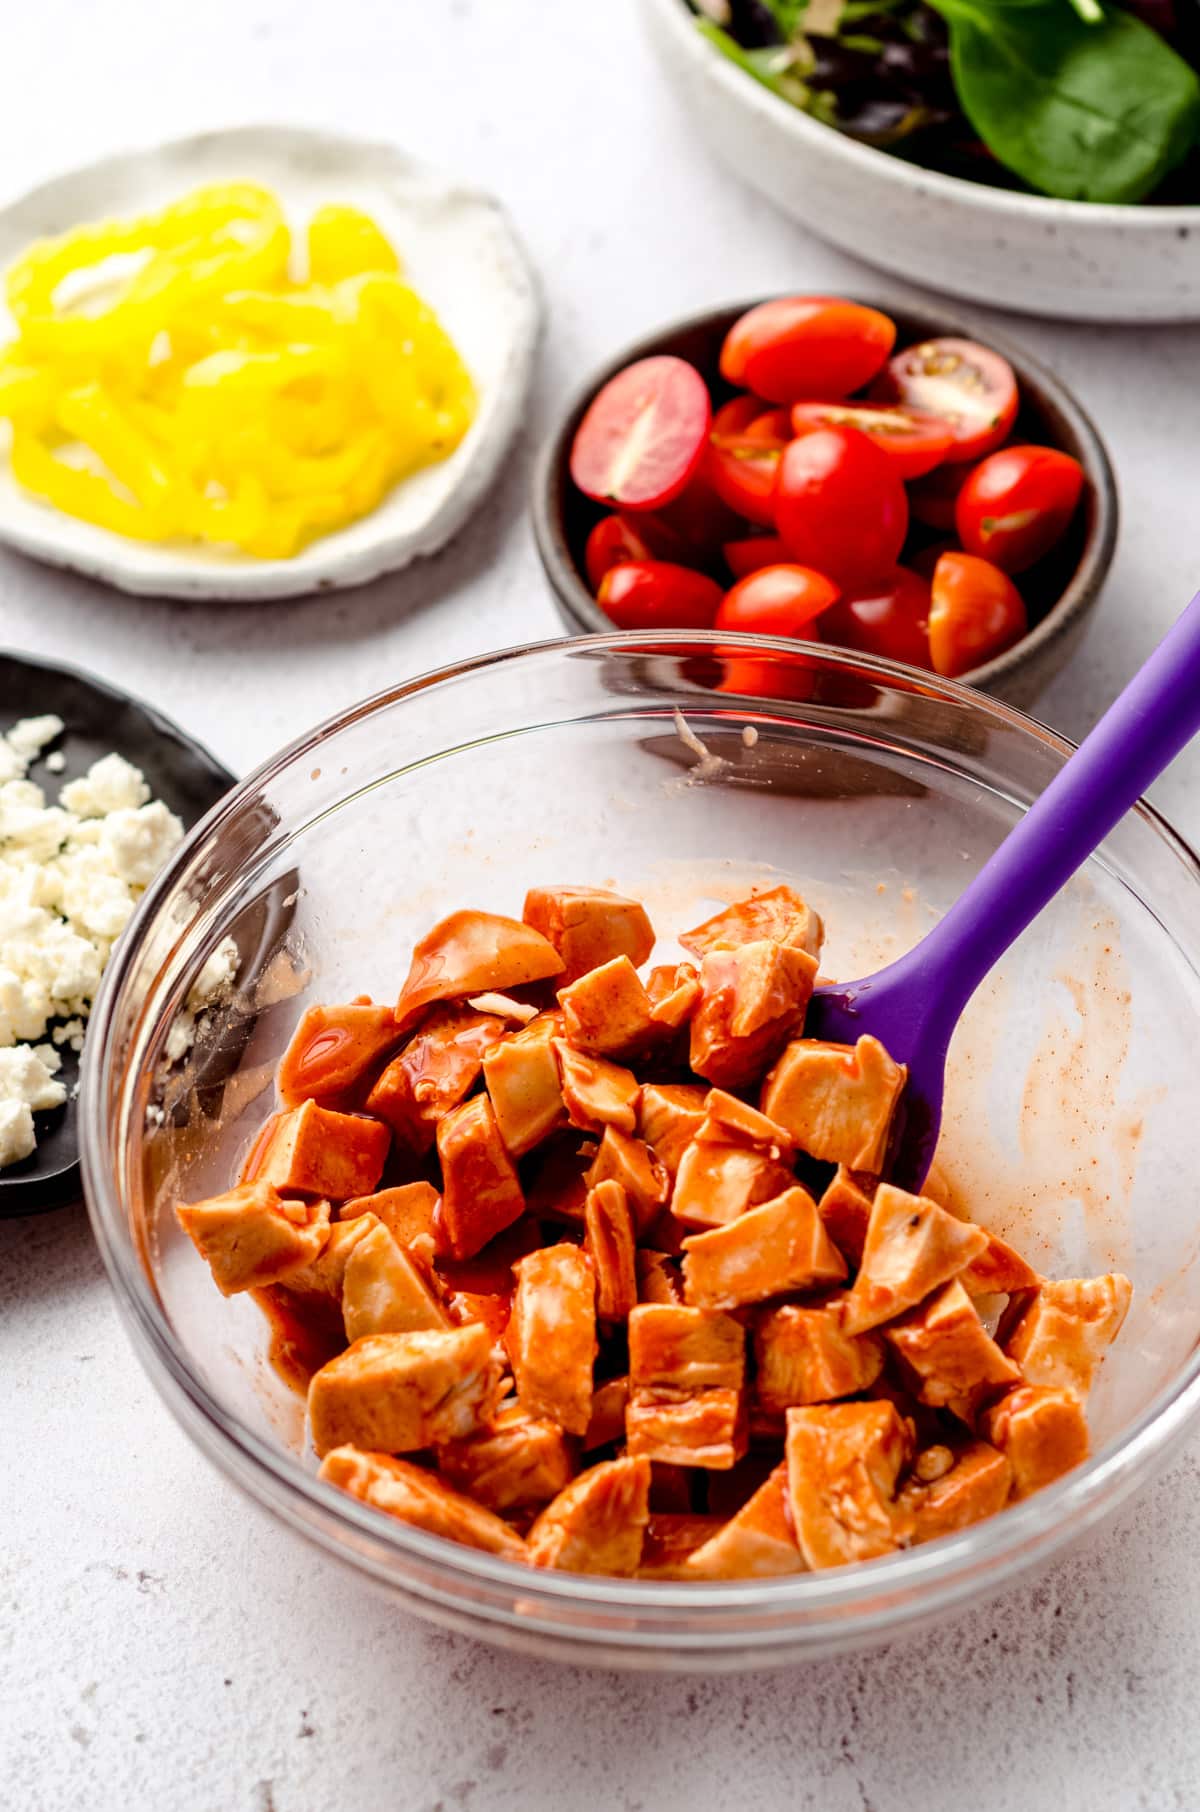 Cubed chicken in a bowl with buffalo sauce. The mixture has a purple spatula sitting in it and there are tomatoes, feta cheese, banana peppers, and mixed greens in the background.